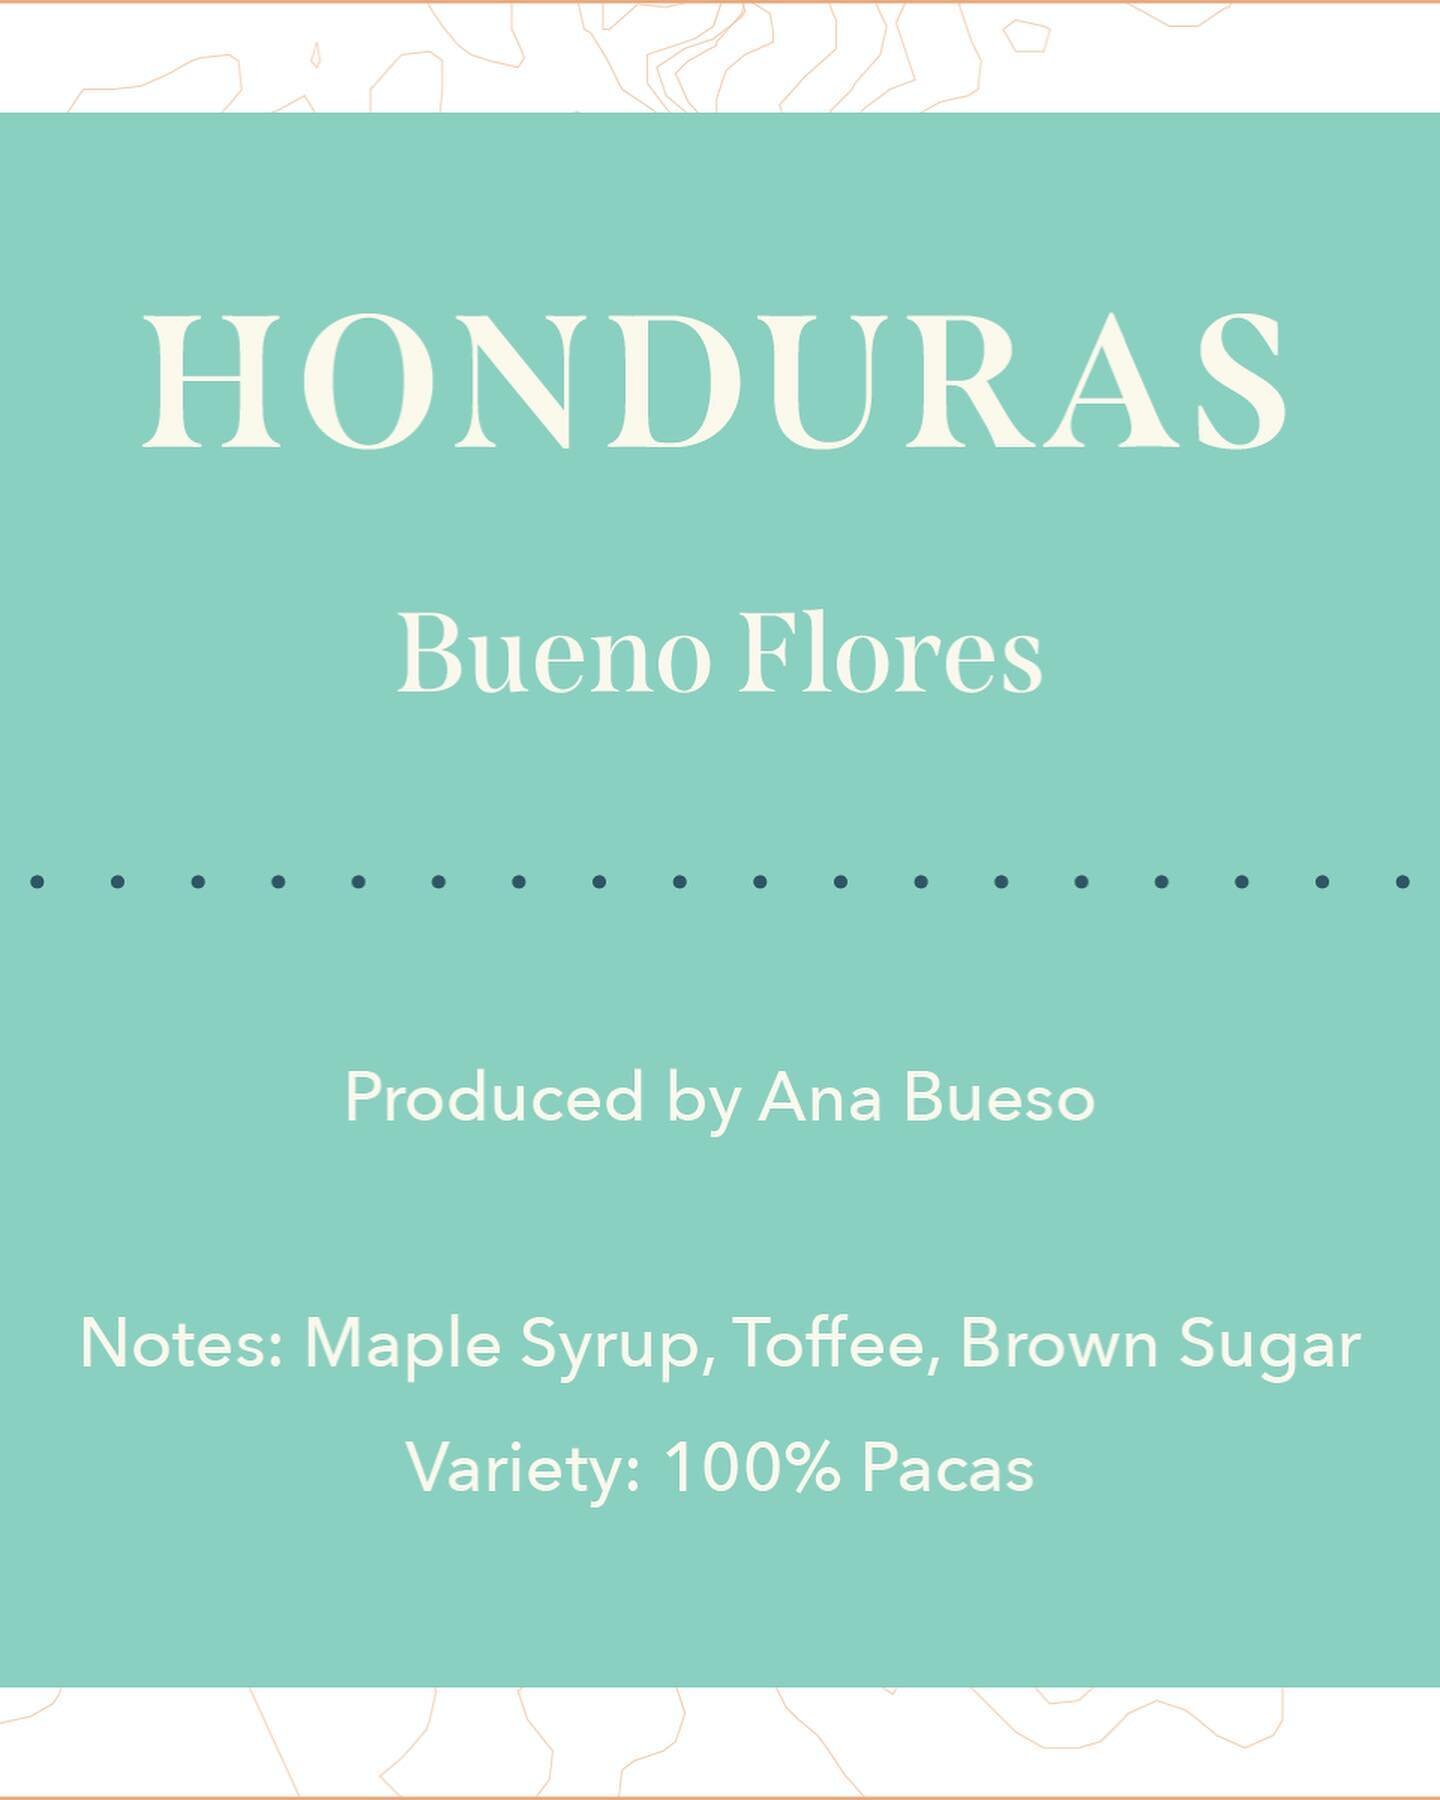 New coffee alert! This is from Honduras and a new producer we are working with this year. In an effort to get more women producers in the mix we&rsquo;ve added Ana Bueso&rsquo;s coffee to the lineup. She is a scientist by trade and has been in coffee